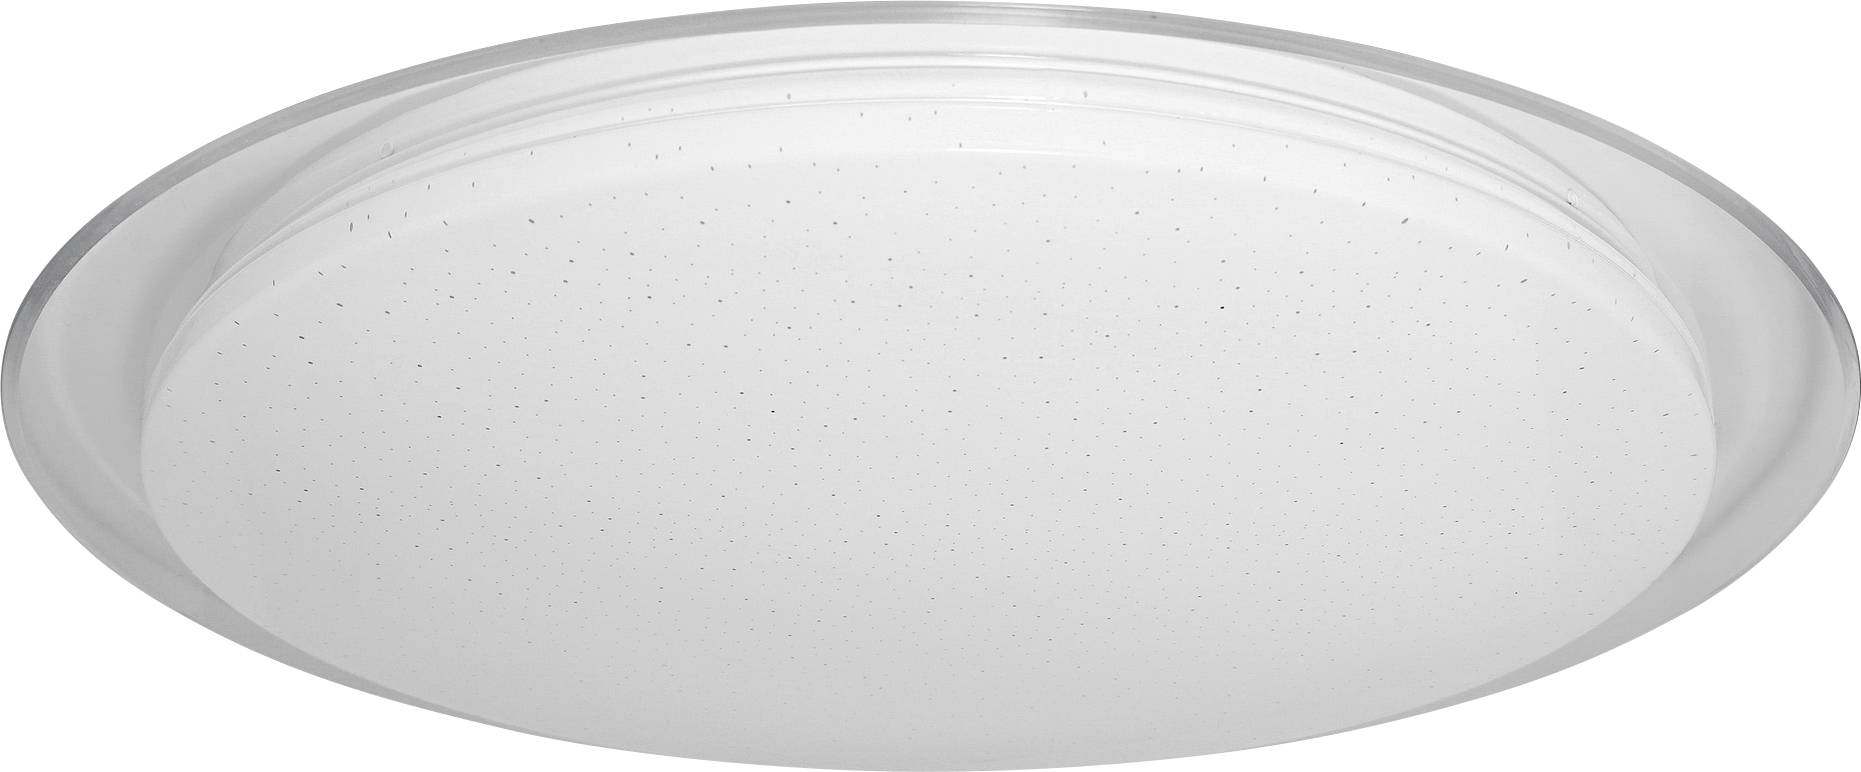 LEDVANCE DECORATIVE CEILING WITH WIFI TECHNOLOGY 4058075573499 LED-Bad-Deckenleuchte EEK: E (A